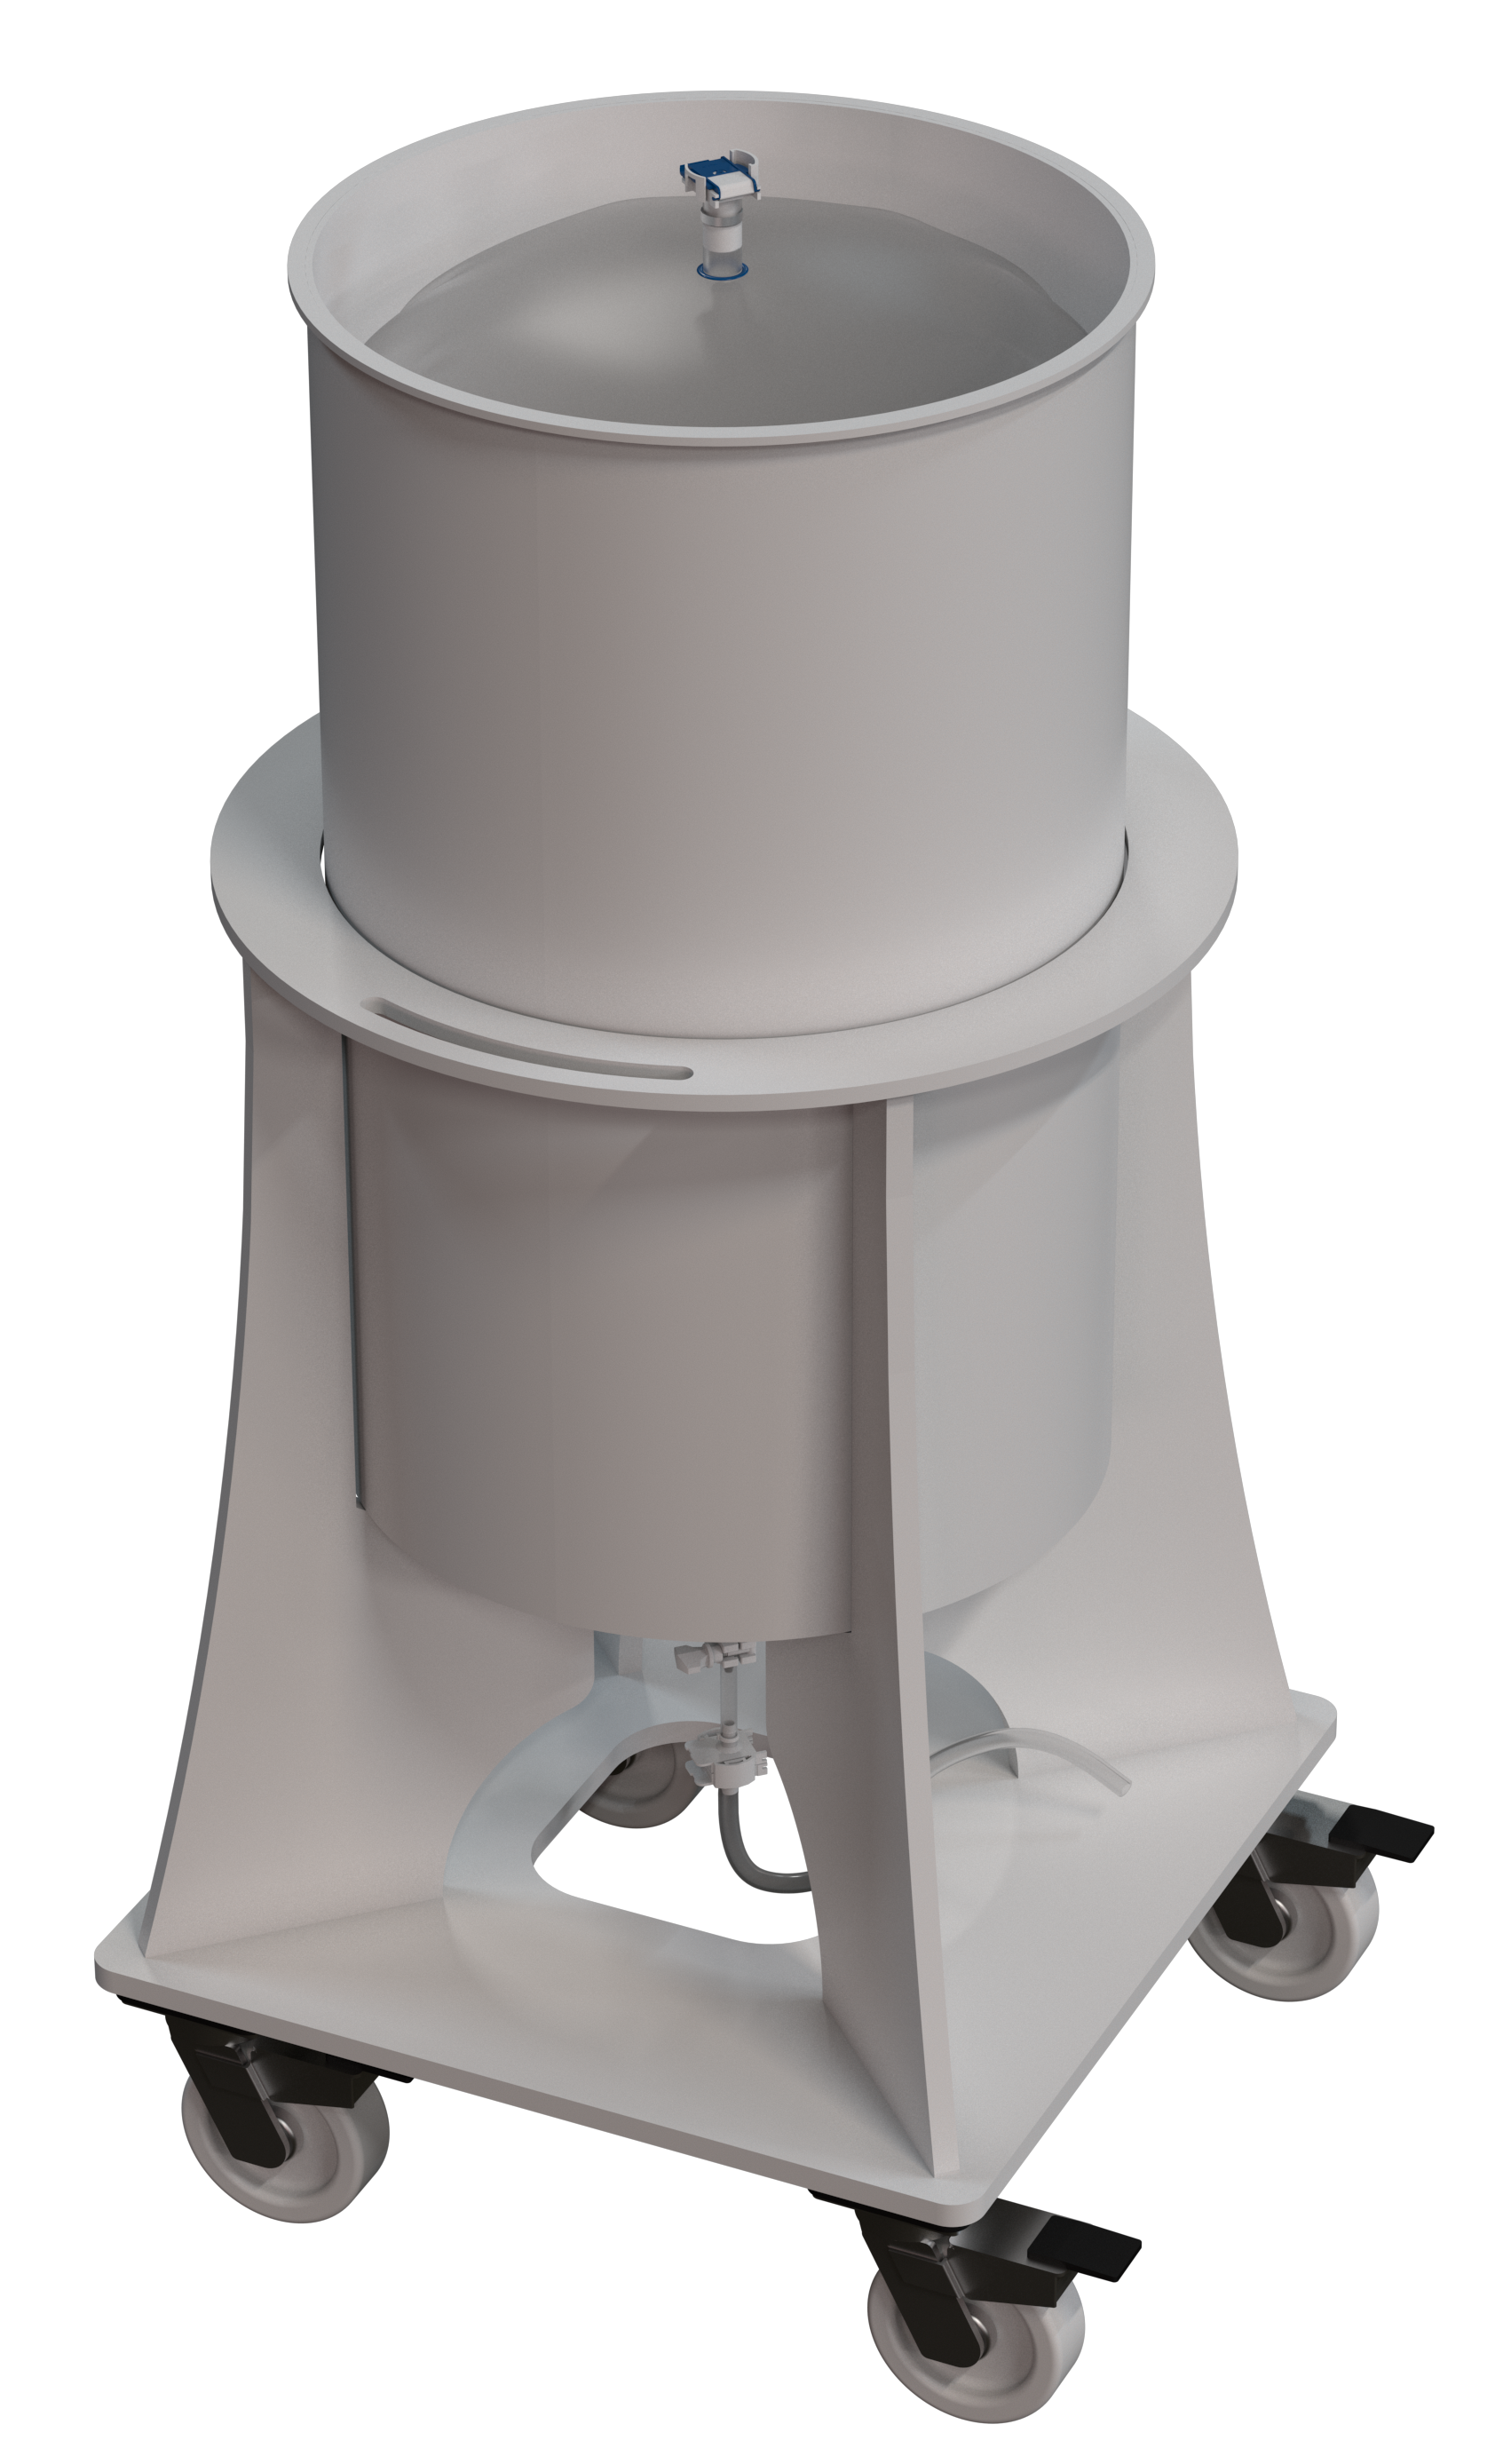 A round 200L drum on casters with custom 3D bag inside with top and bottom ports, a custom fabricated cylindrical containment solution.